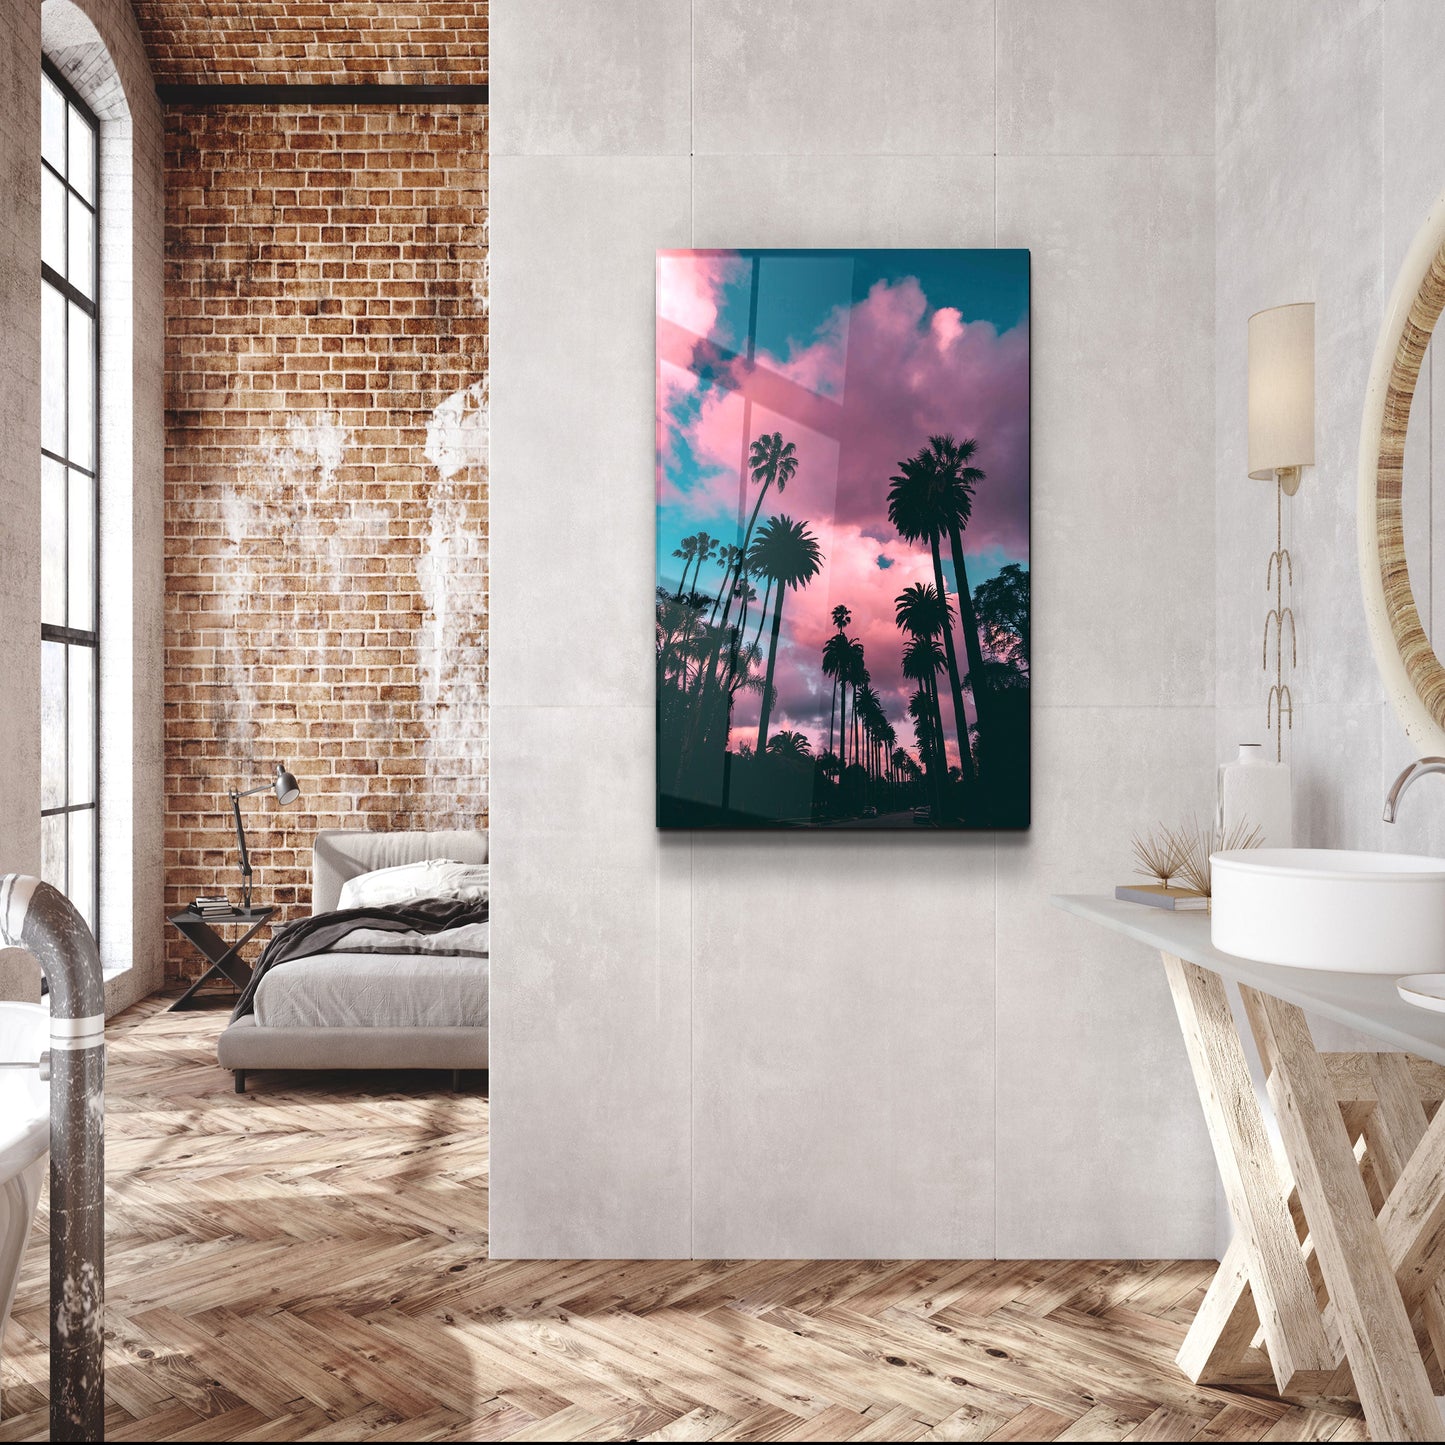 Pink Sky - Designer's Collection Glass Wall Art